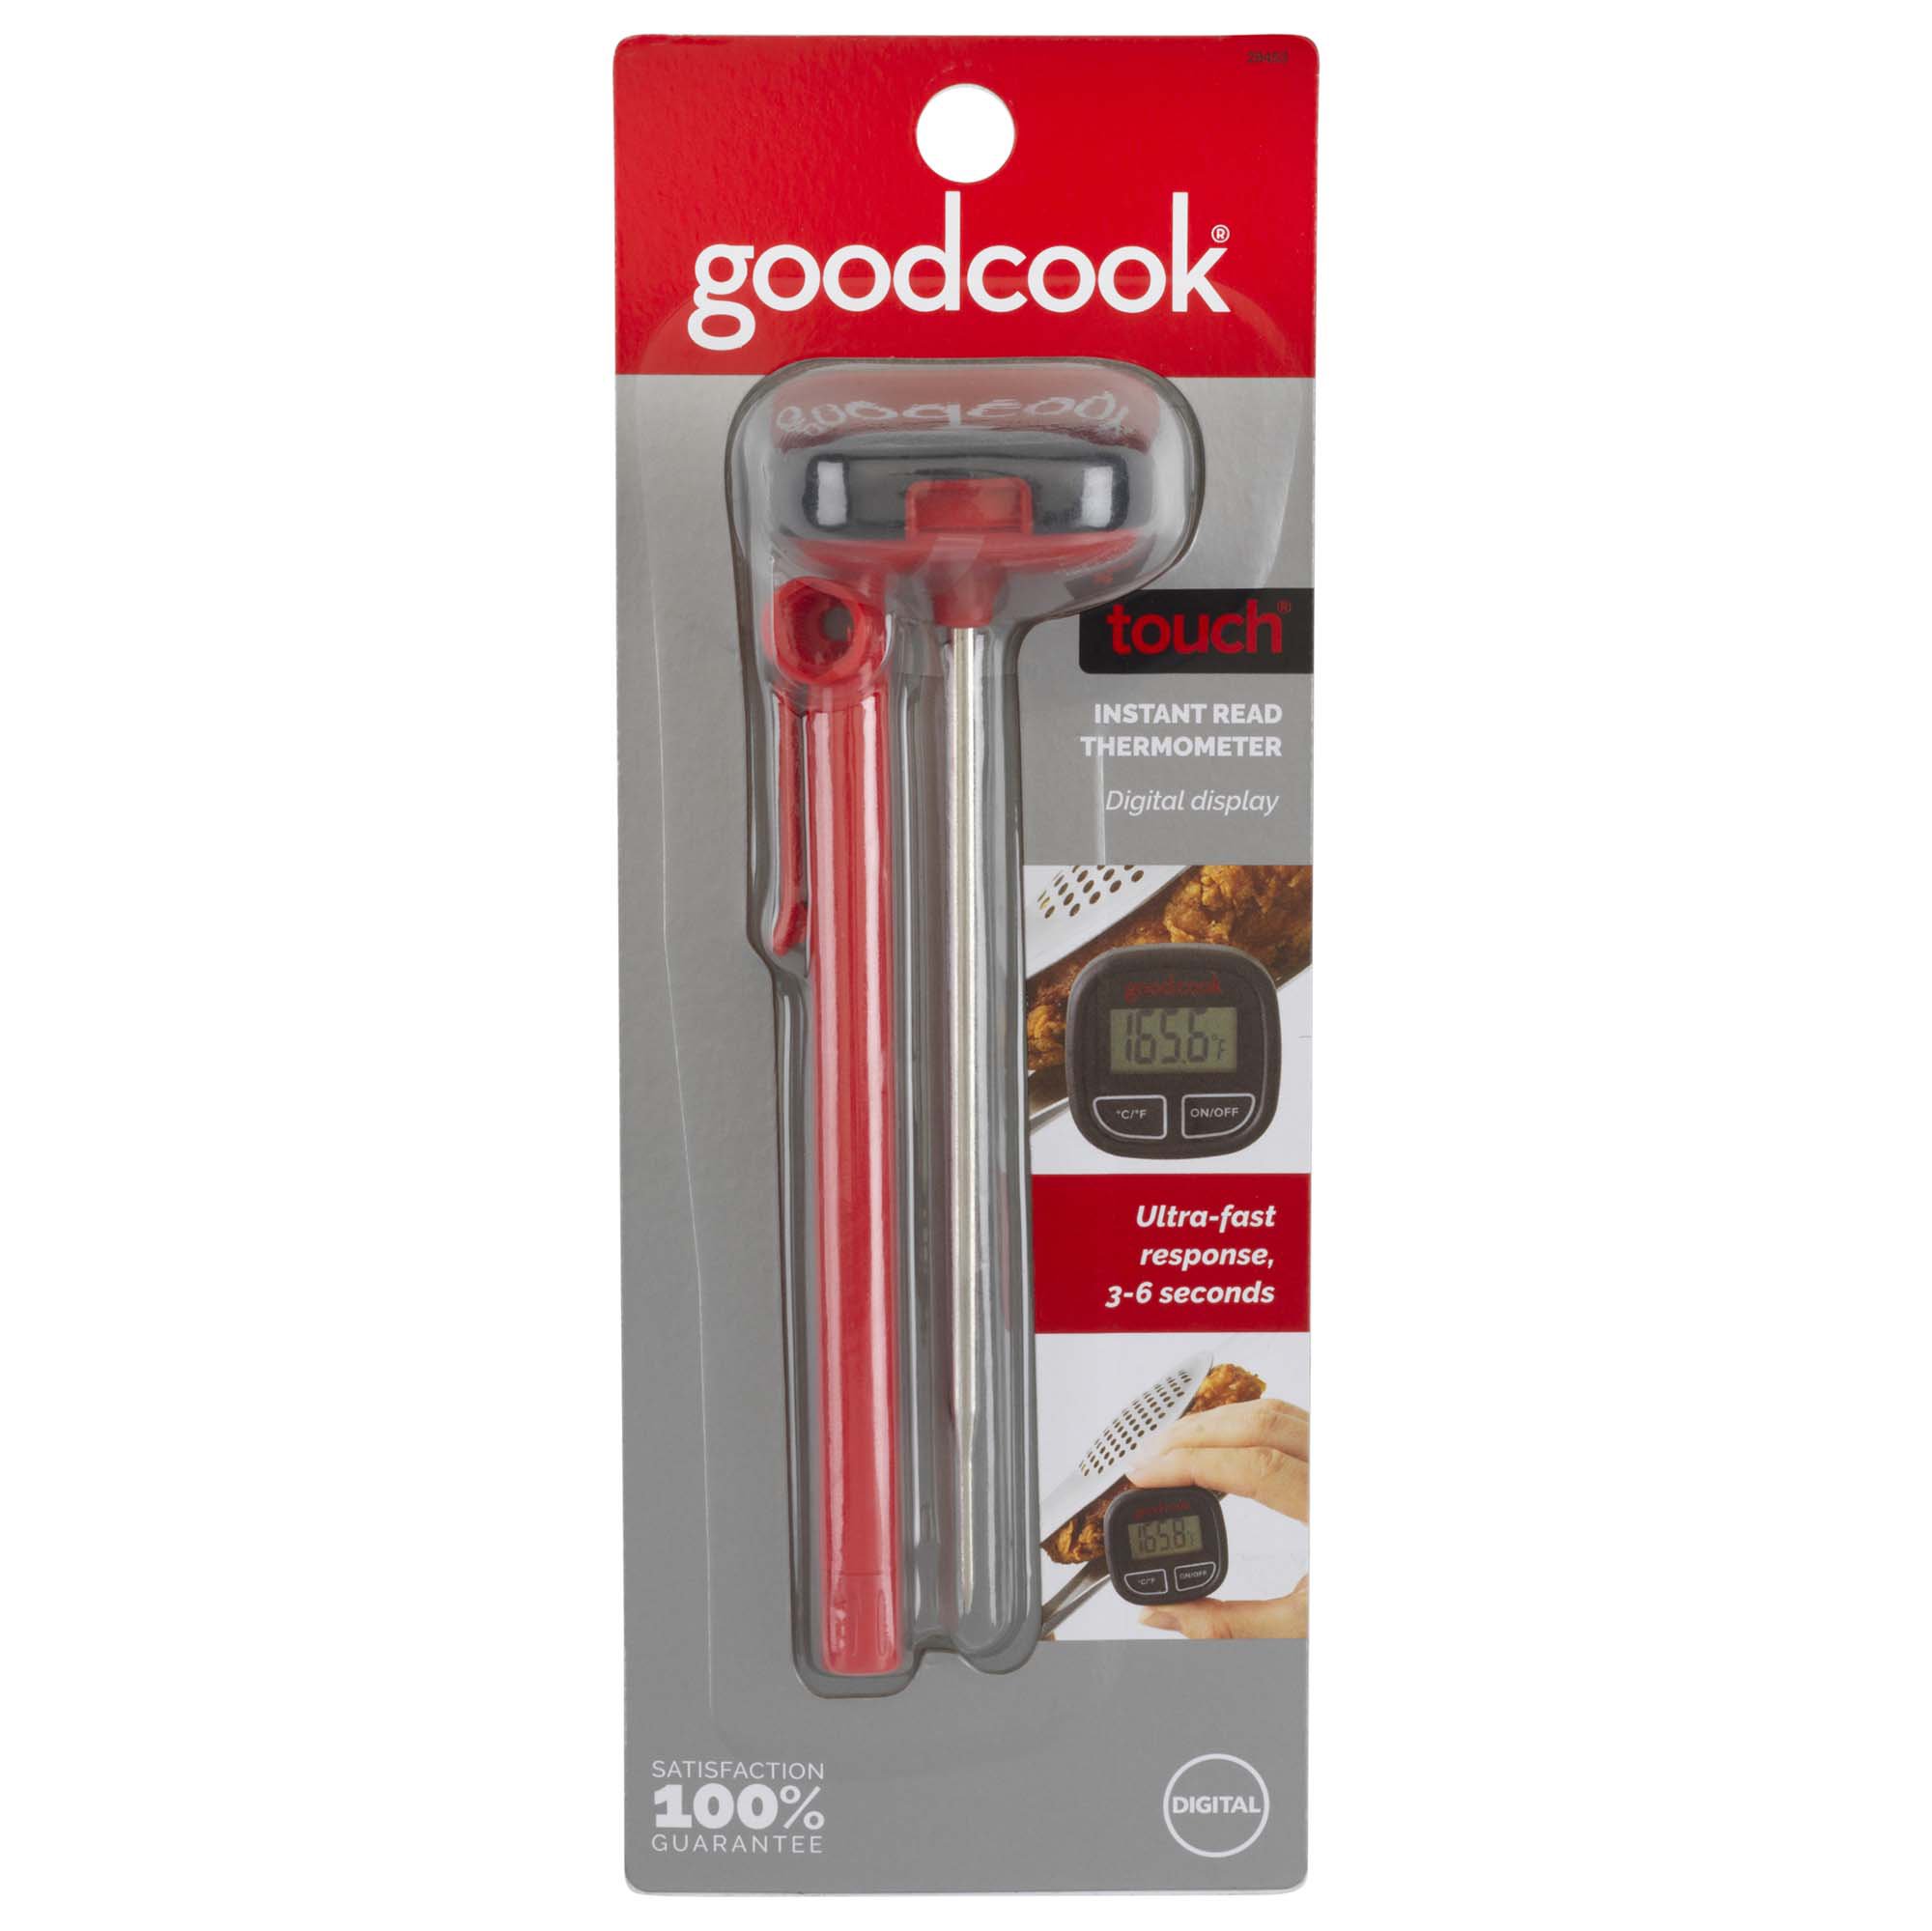 Good Cook Touch Digital Instant Read Thermometer